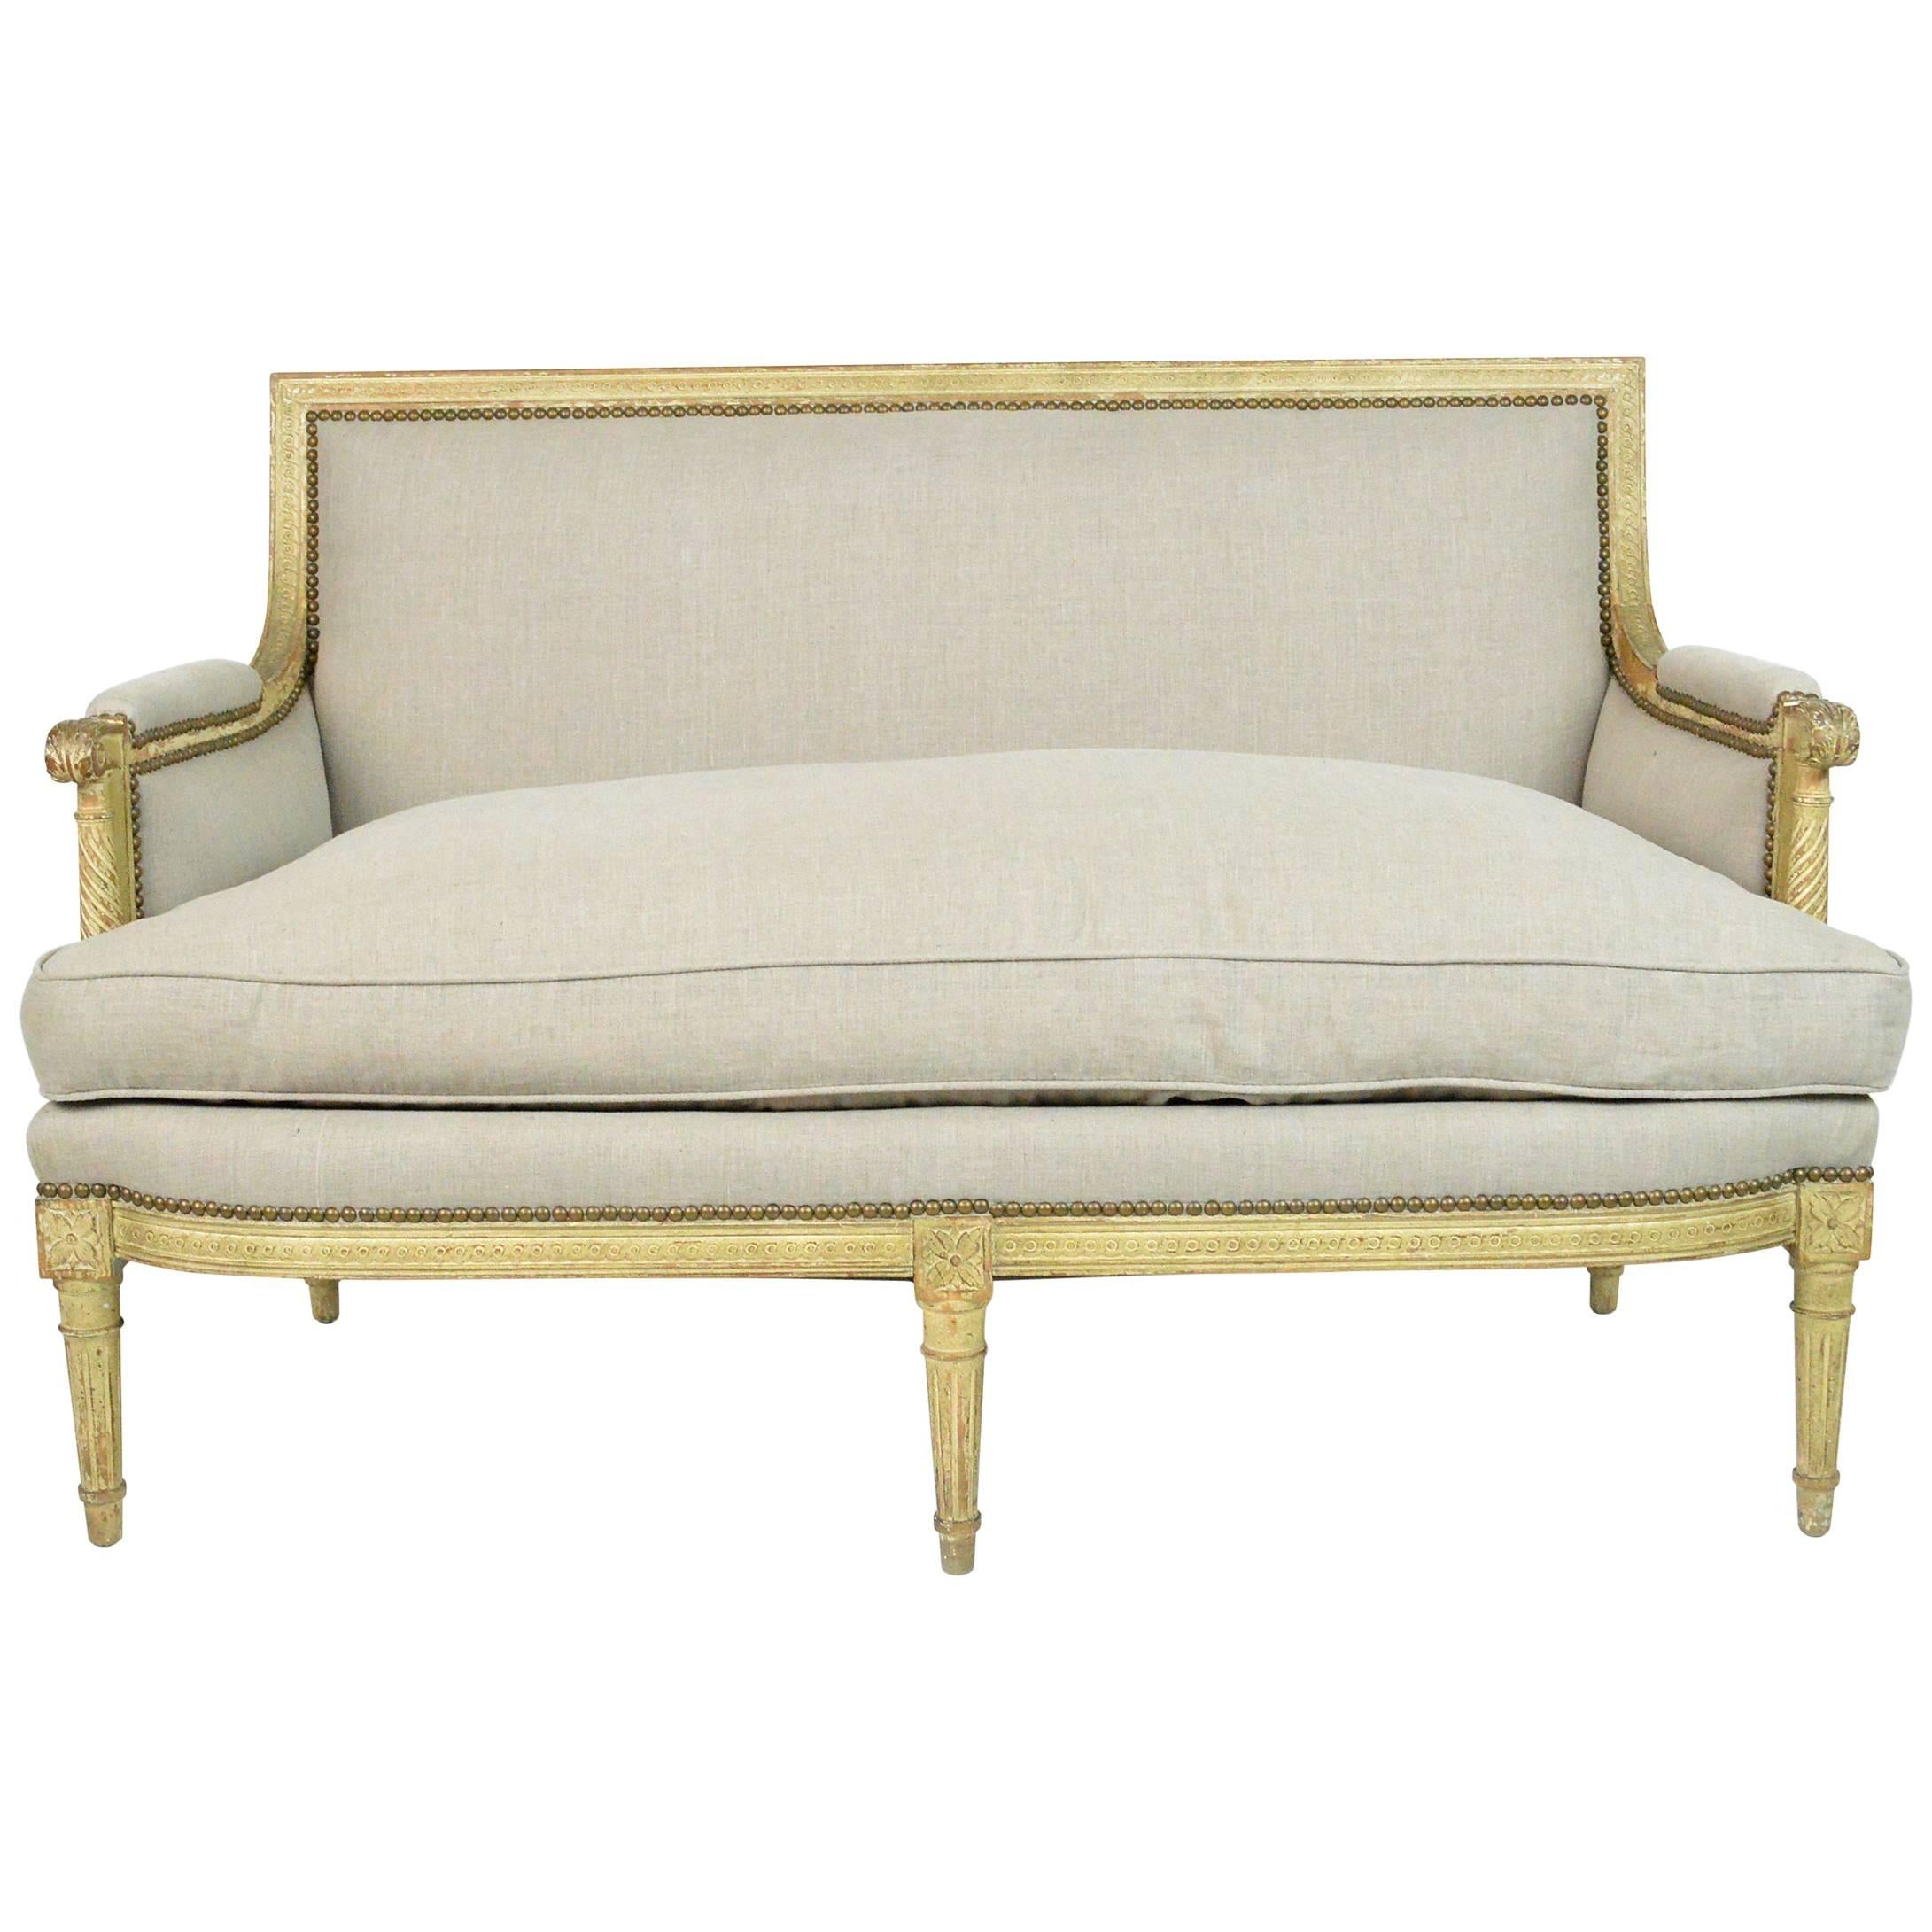 Louis XVI Style French Settee For Sale